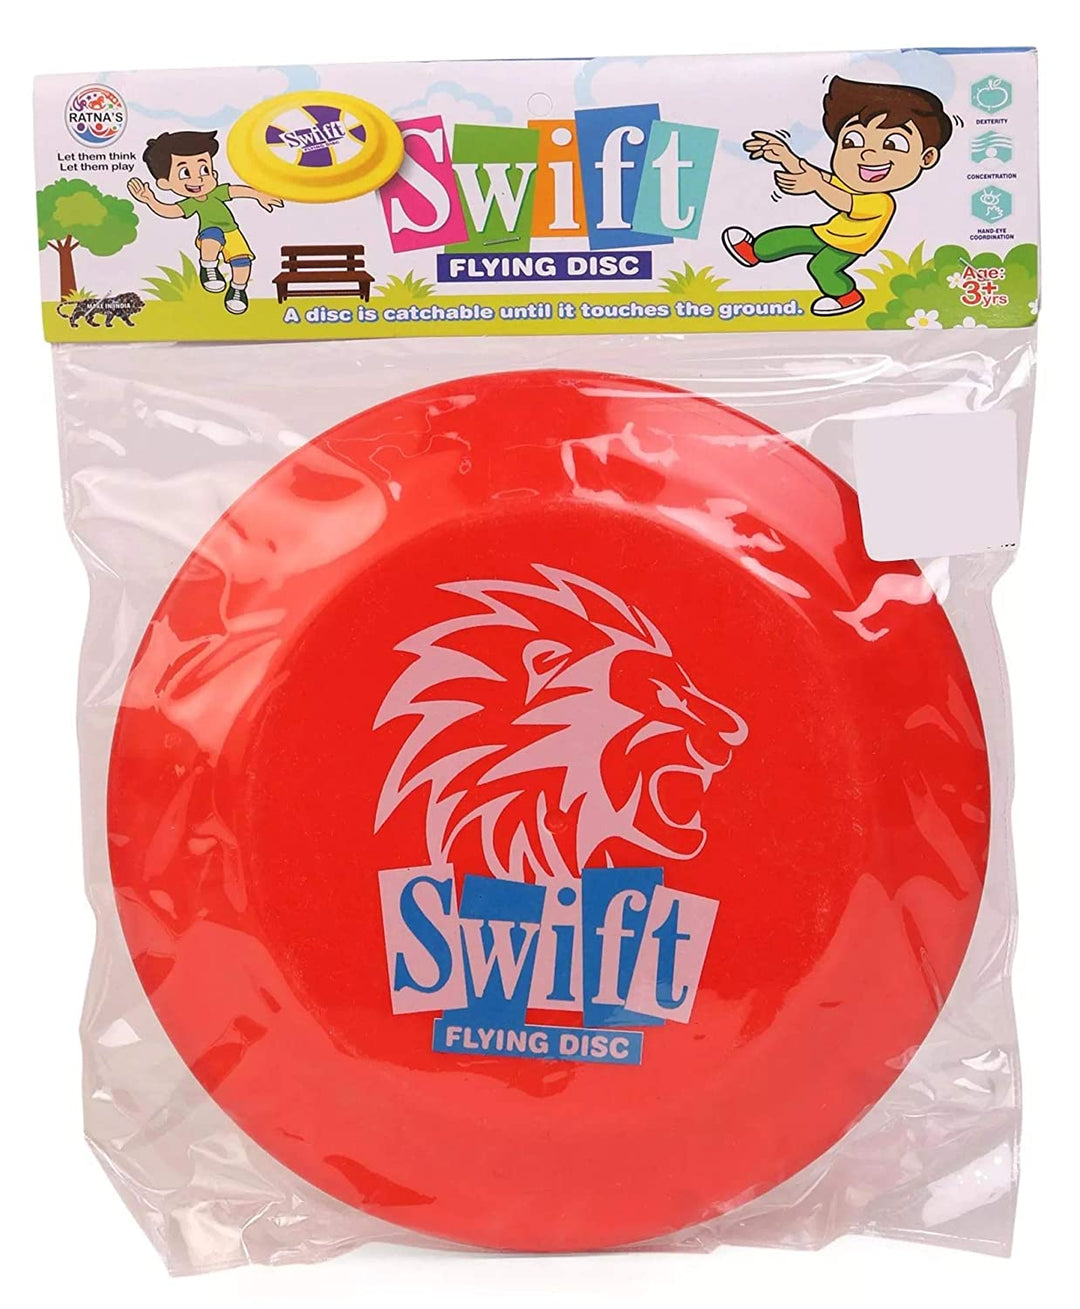 Ratna's Premium Quality Plastic Swift Flying Disc for Kids Outdoor Play Age 3  - 10 Years